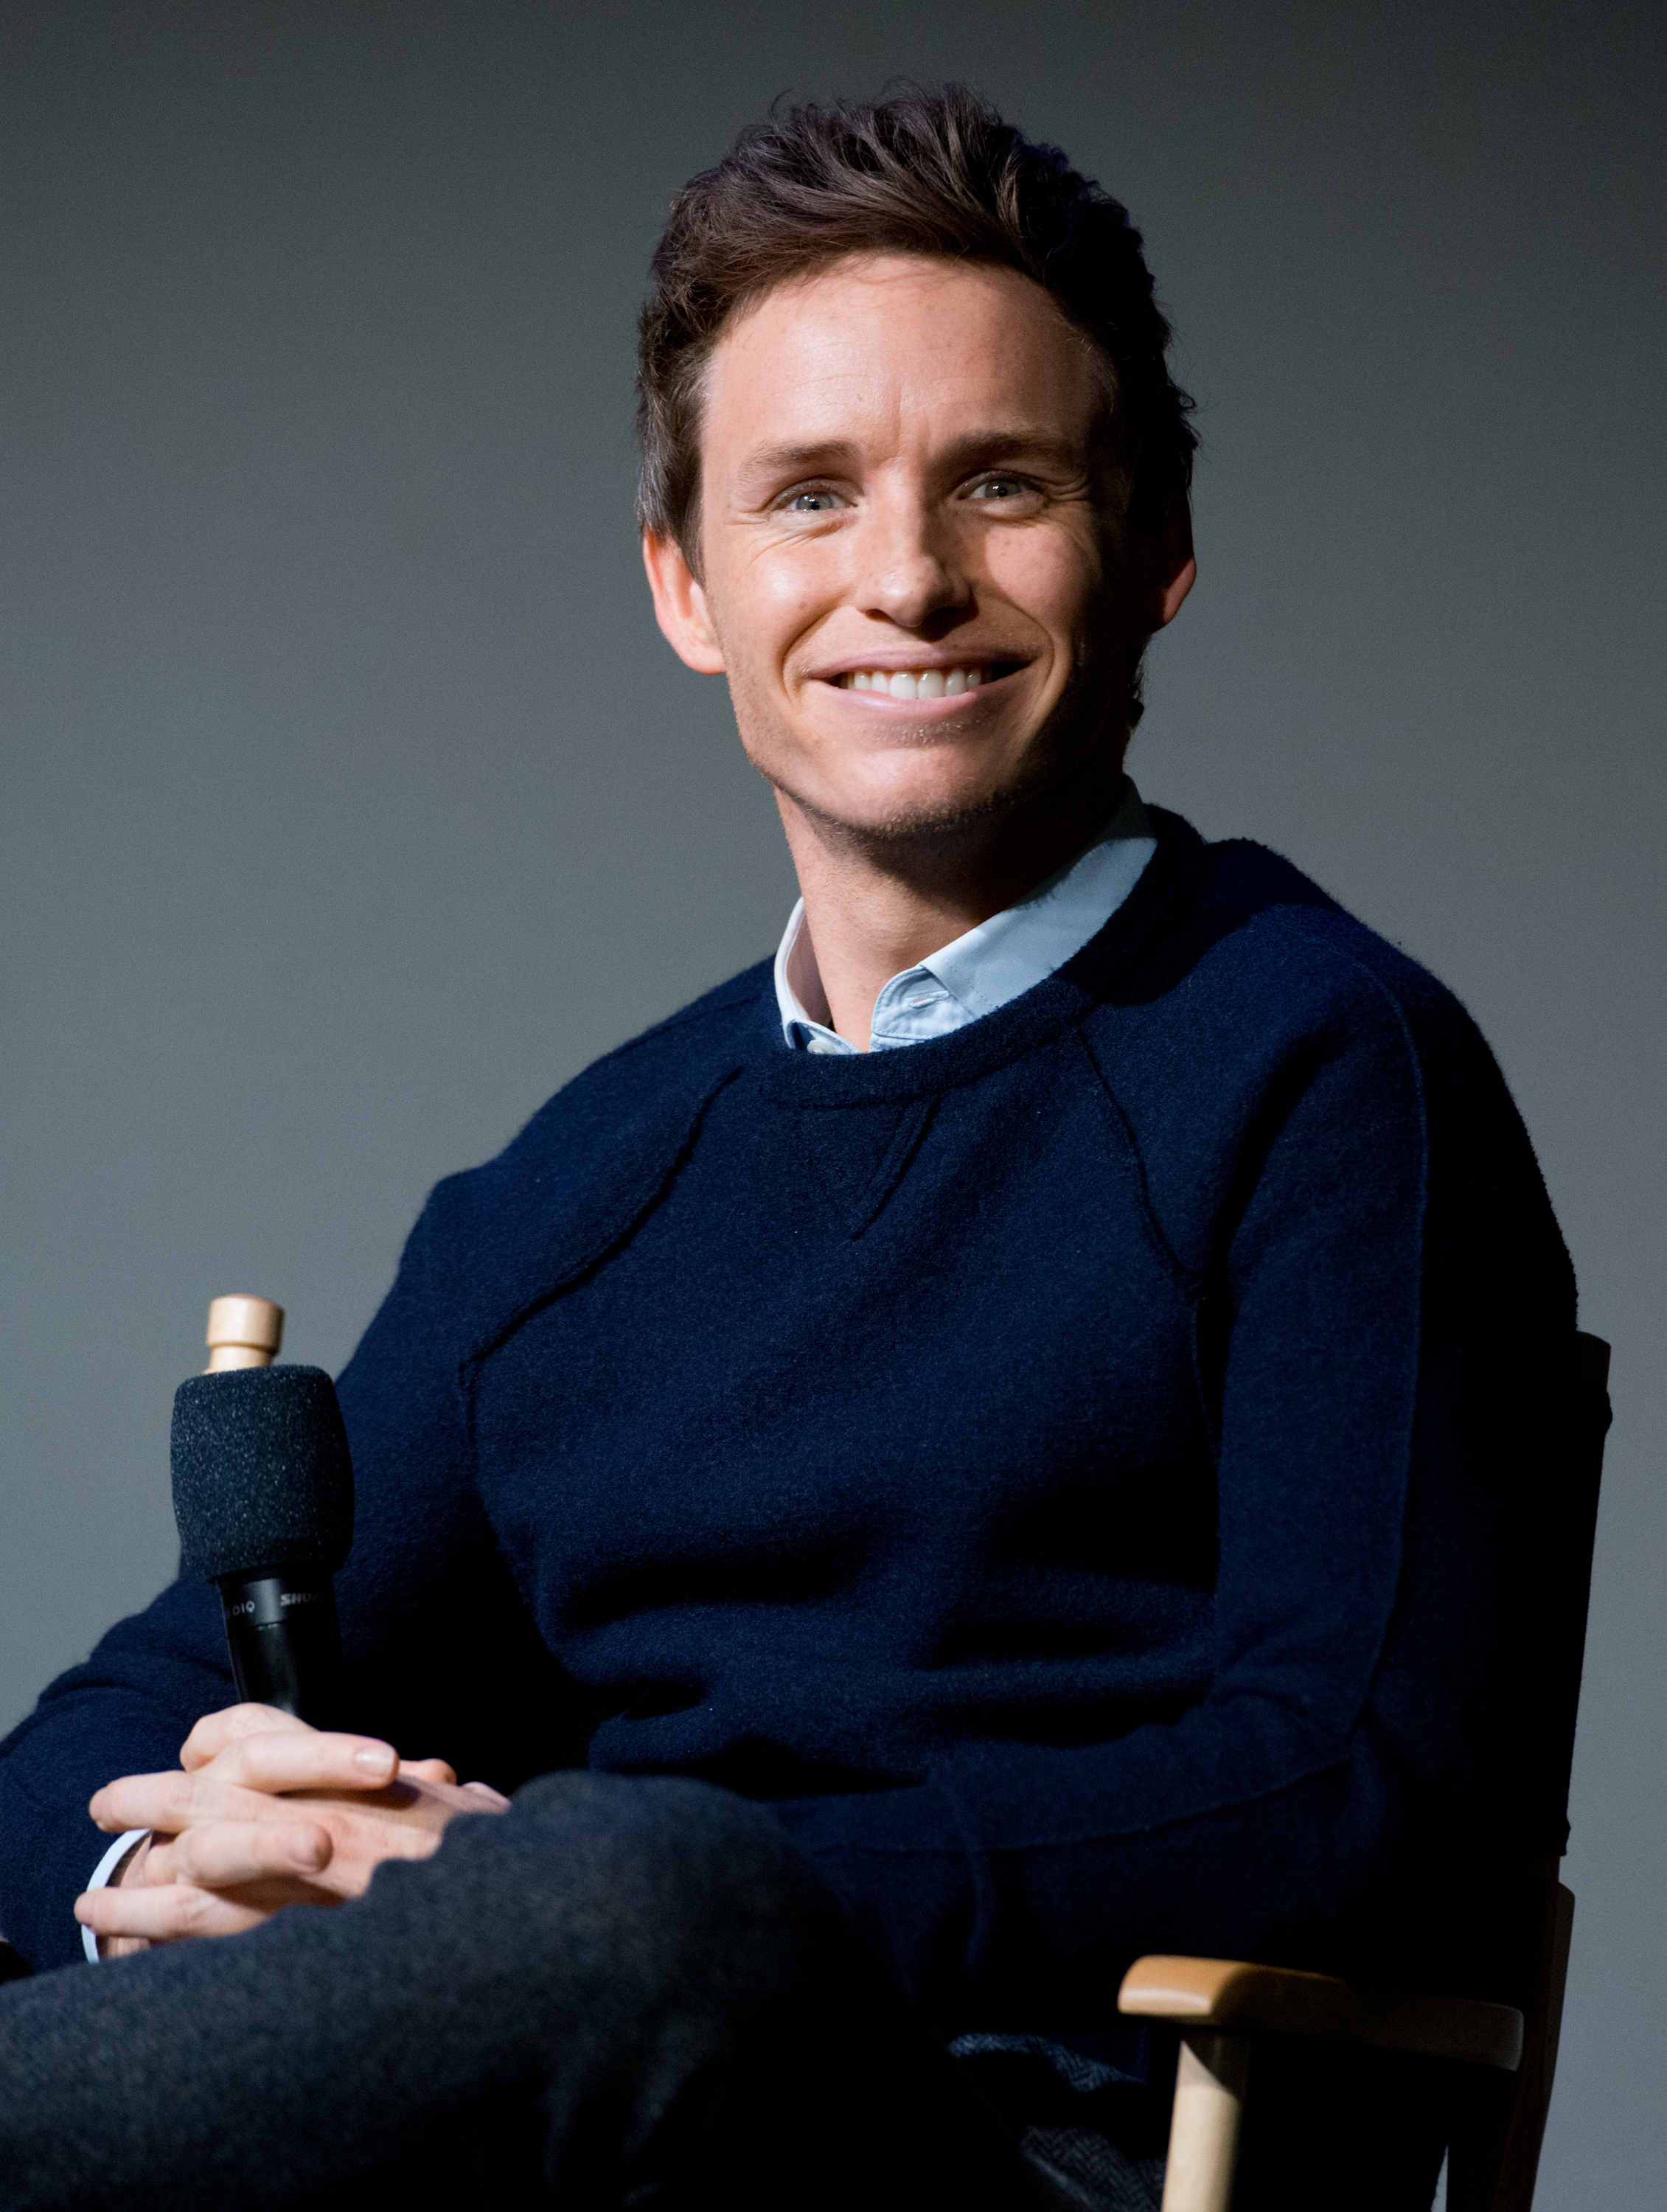 Apple Store Soho Presents: Meet the Actor: Eddie Redmayne, "The Theory of Everything"